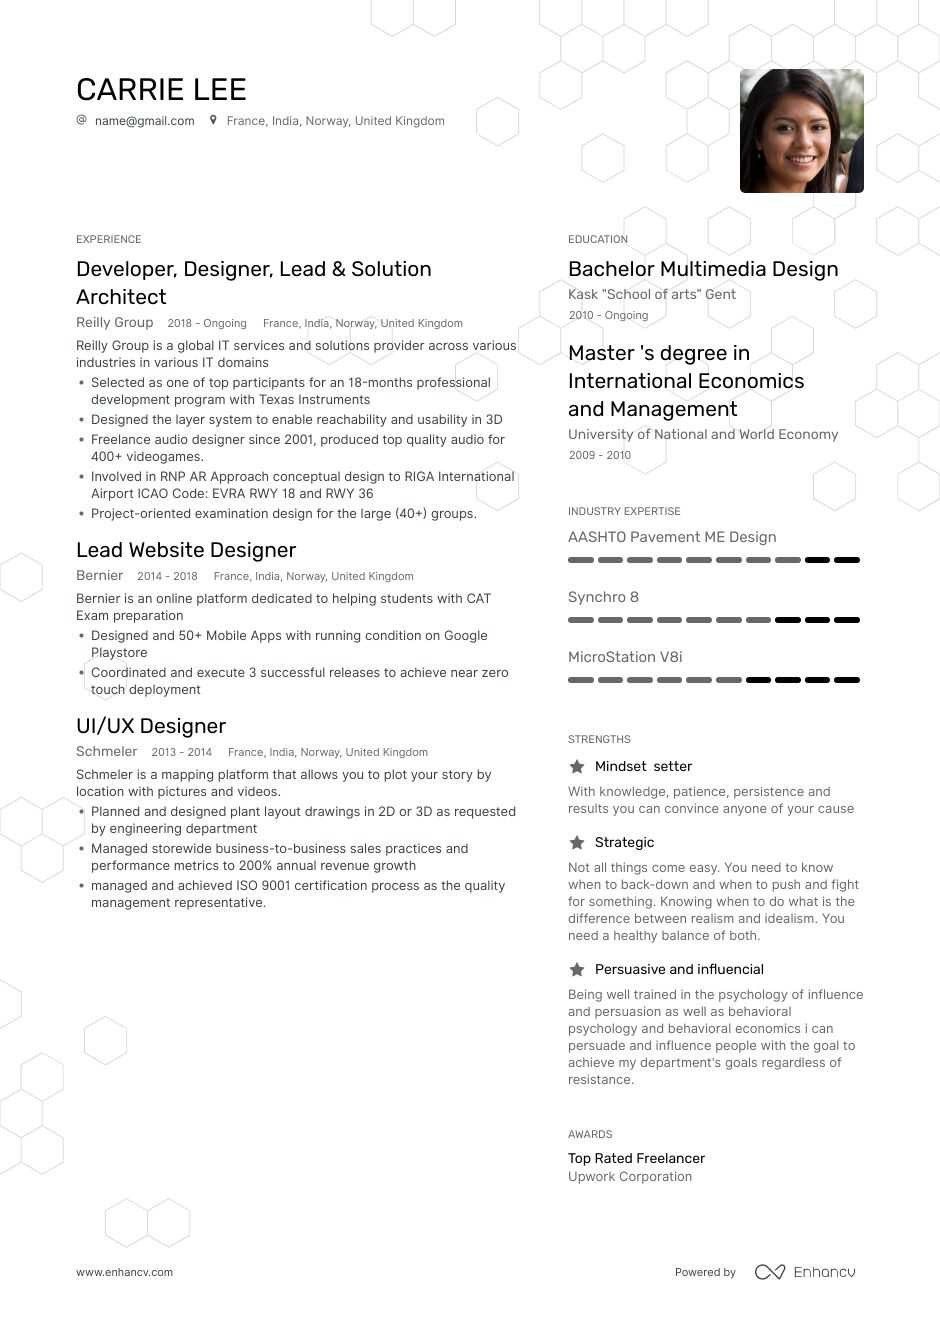 Sample Resume for Graphic Design Student top Graphic Designer Resume Examples & Samples for 2021 Enhancv.com